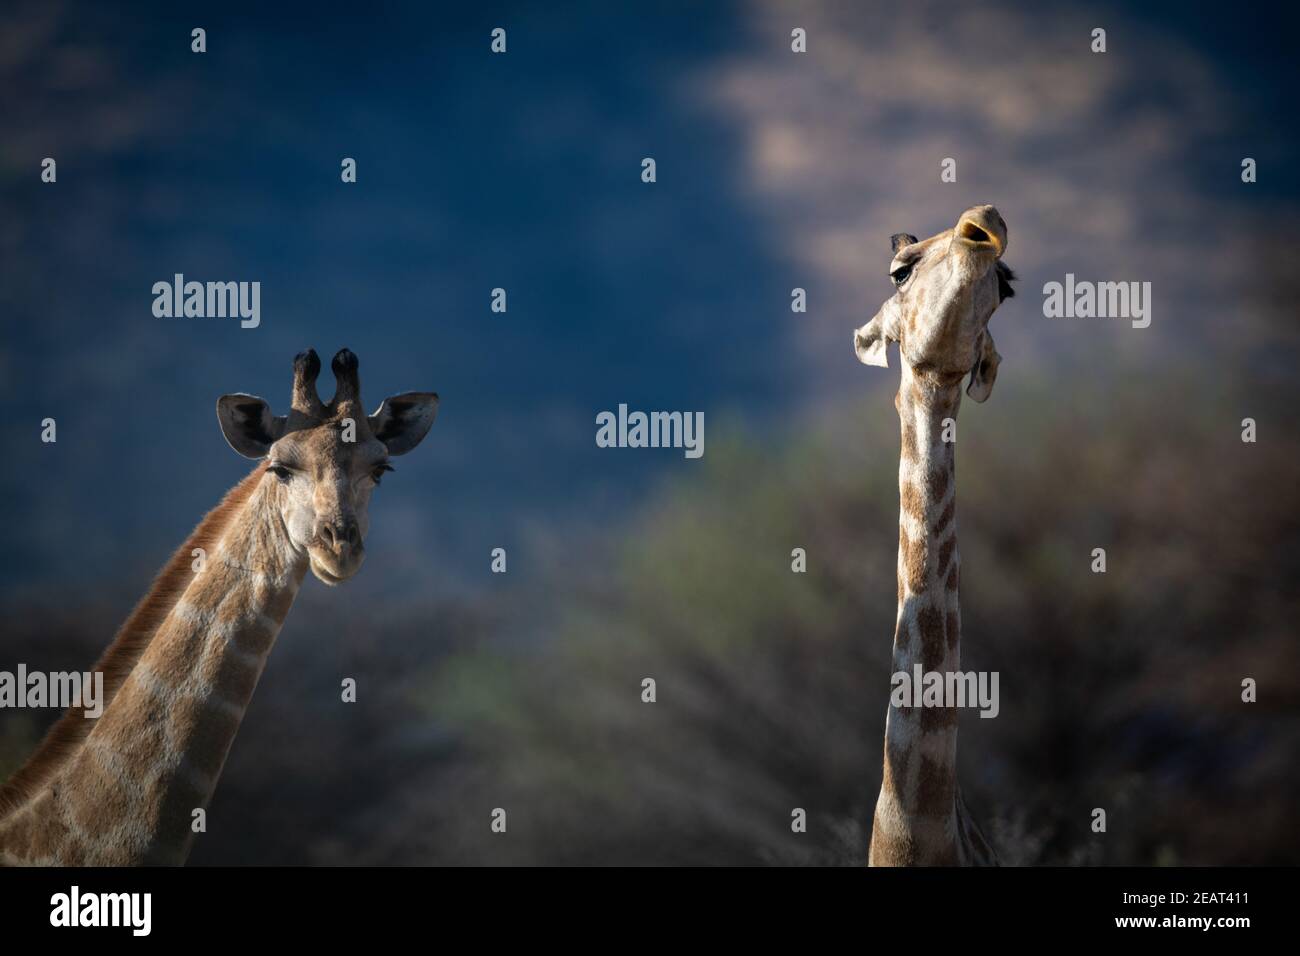 Close-up of necks of two southern giraffes Stock Photo